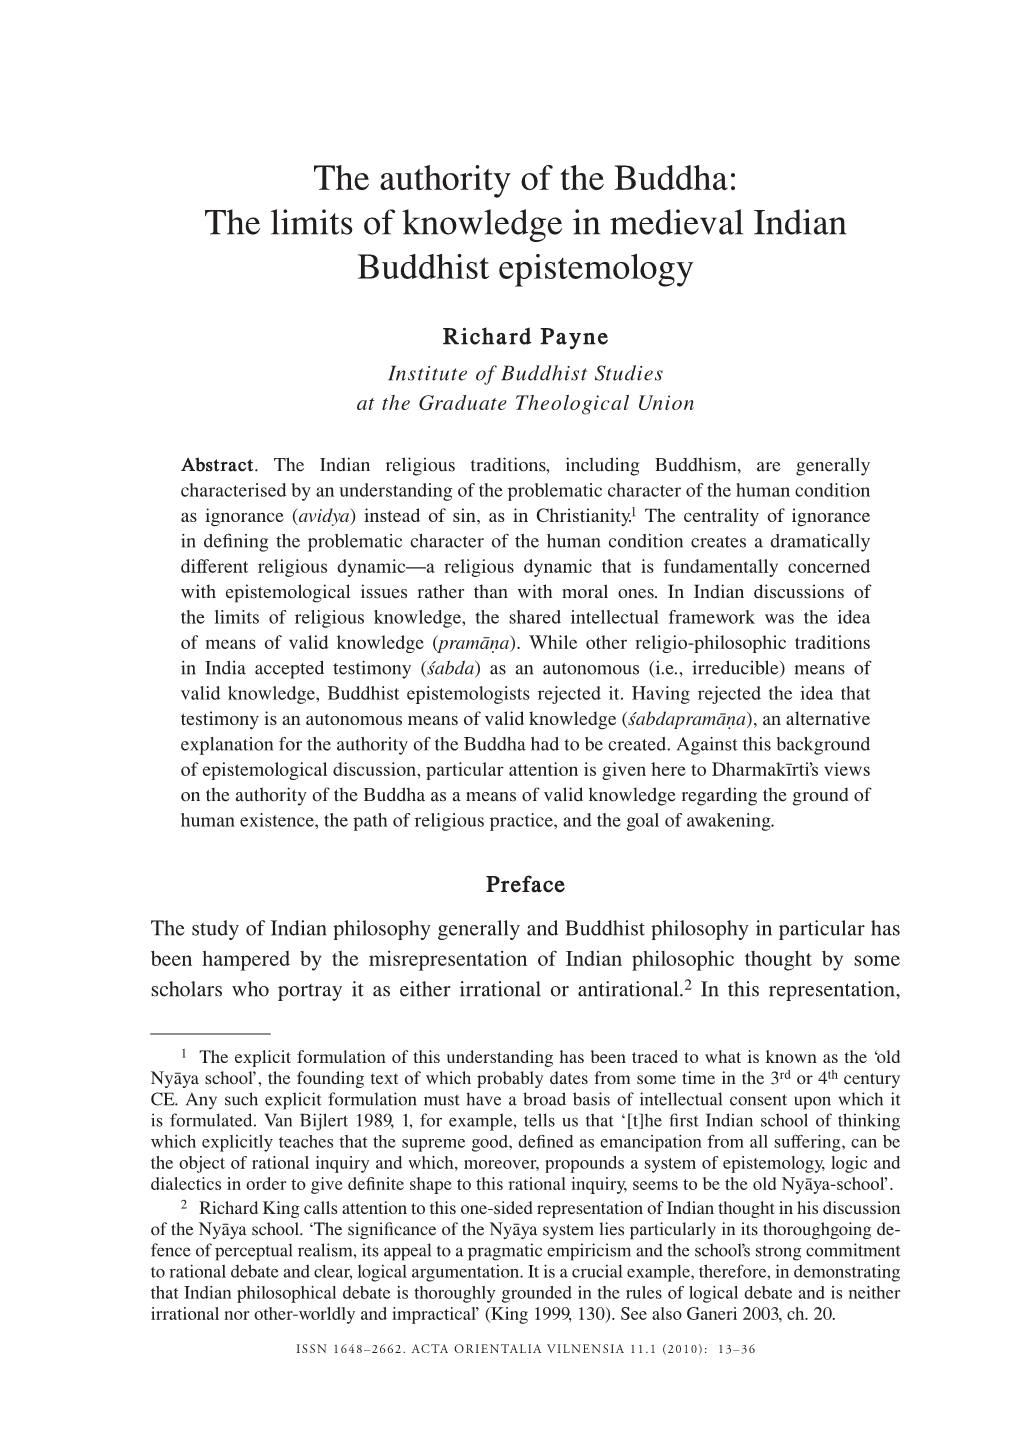 The Authority of the Buddha: the Limits of Knowledge in Medieval Indian Buddhist Epistemology